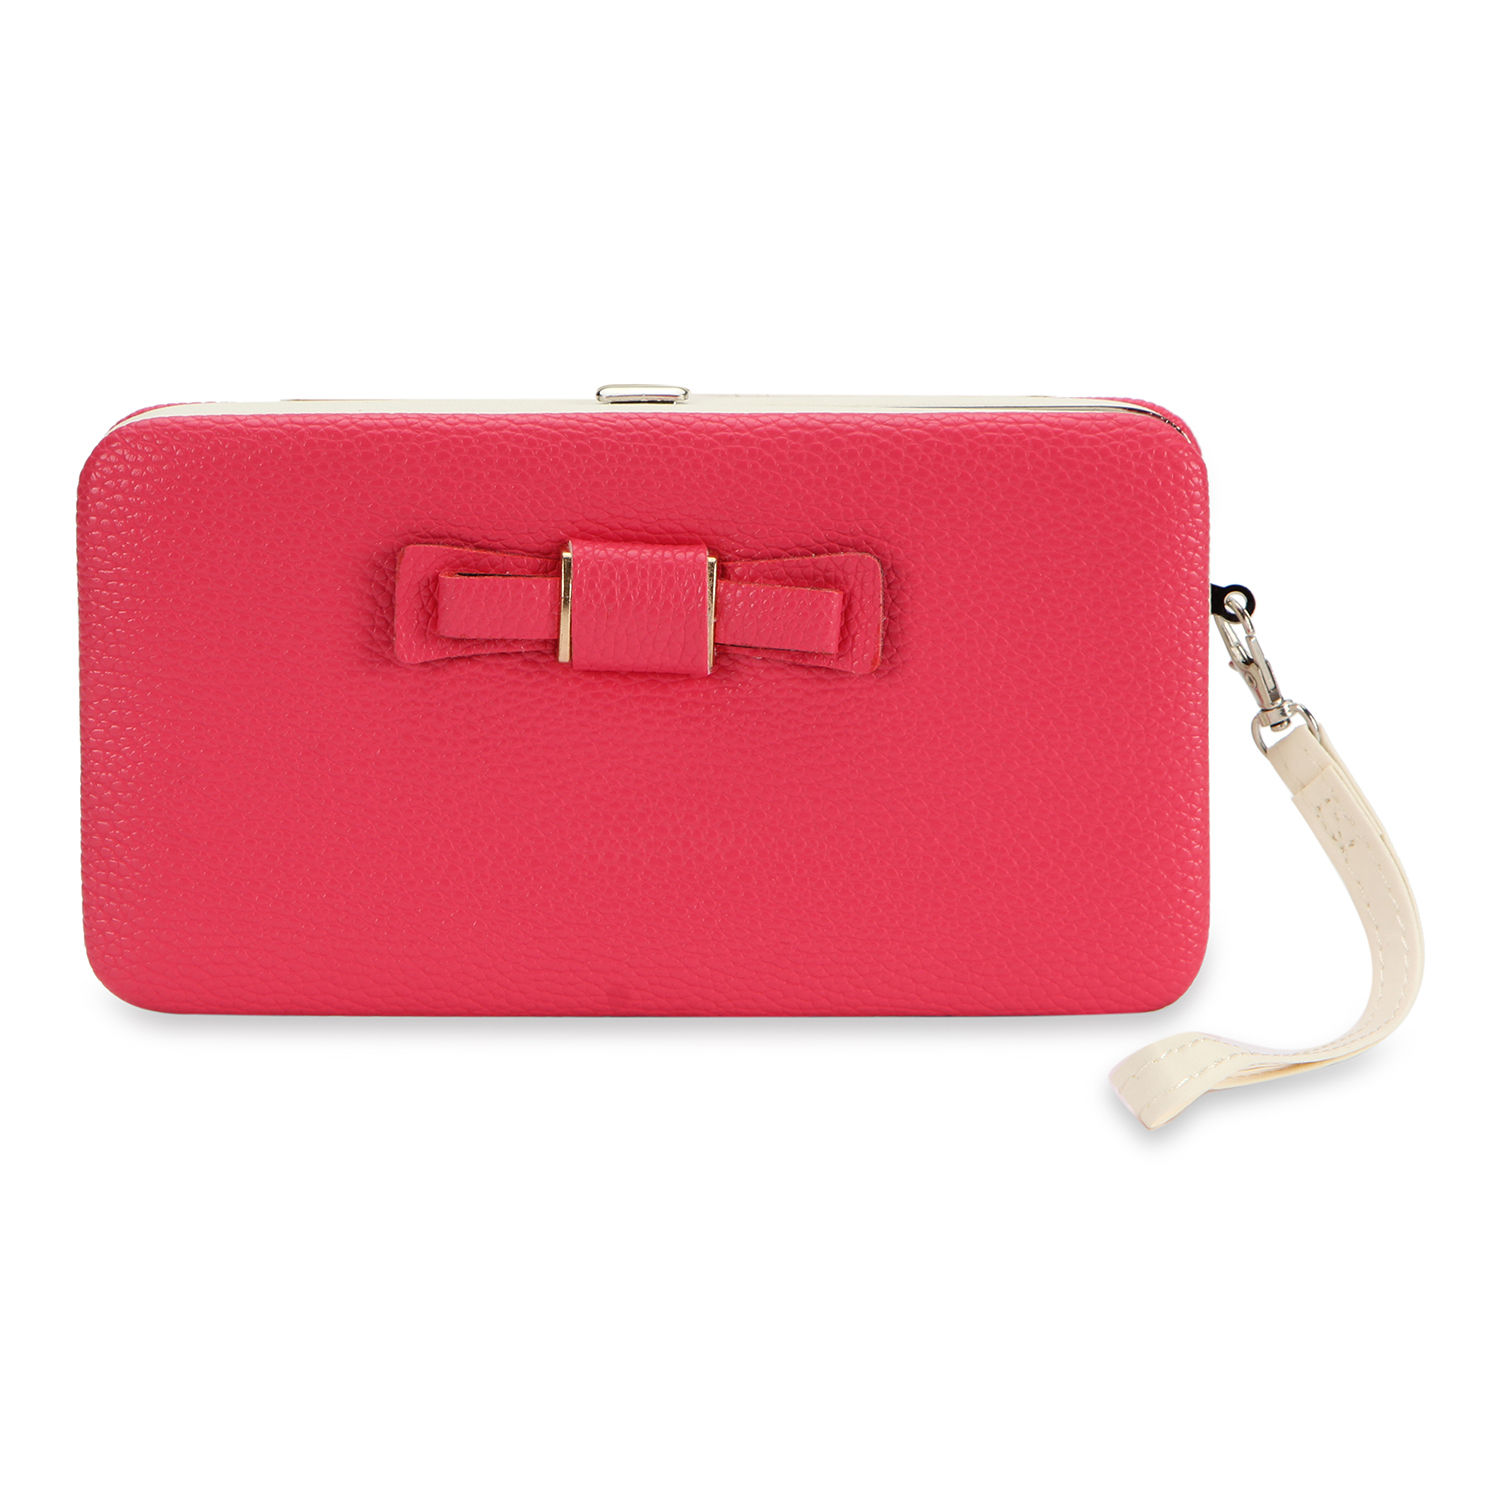 NFI Essentials Women's Mobile Cell Phone Holder Pocket Wallet Hand Purse Clutch Crossbody Sling Bag (Pink) At Nykaa, Best Beauty Products Online